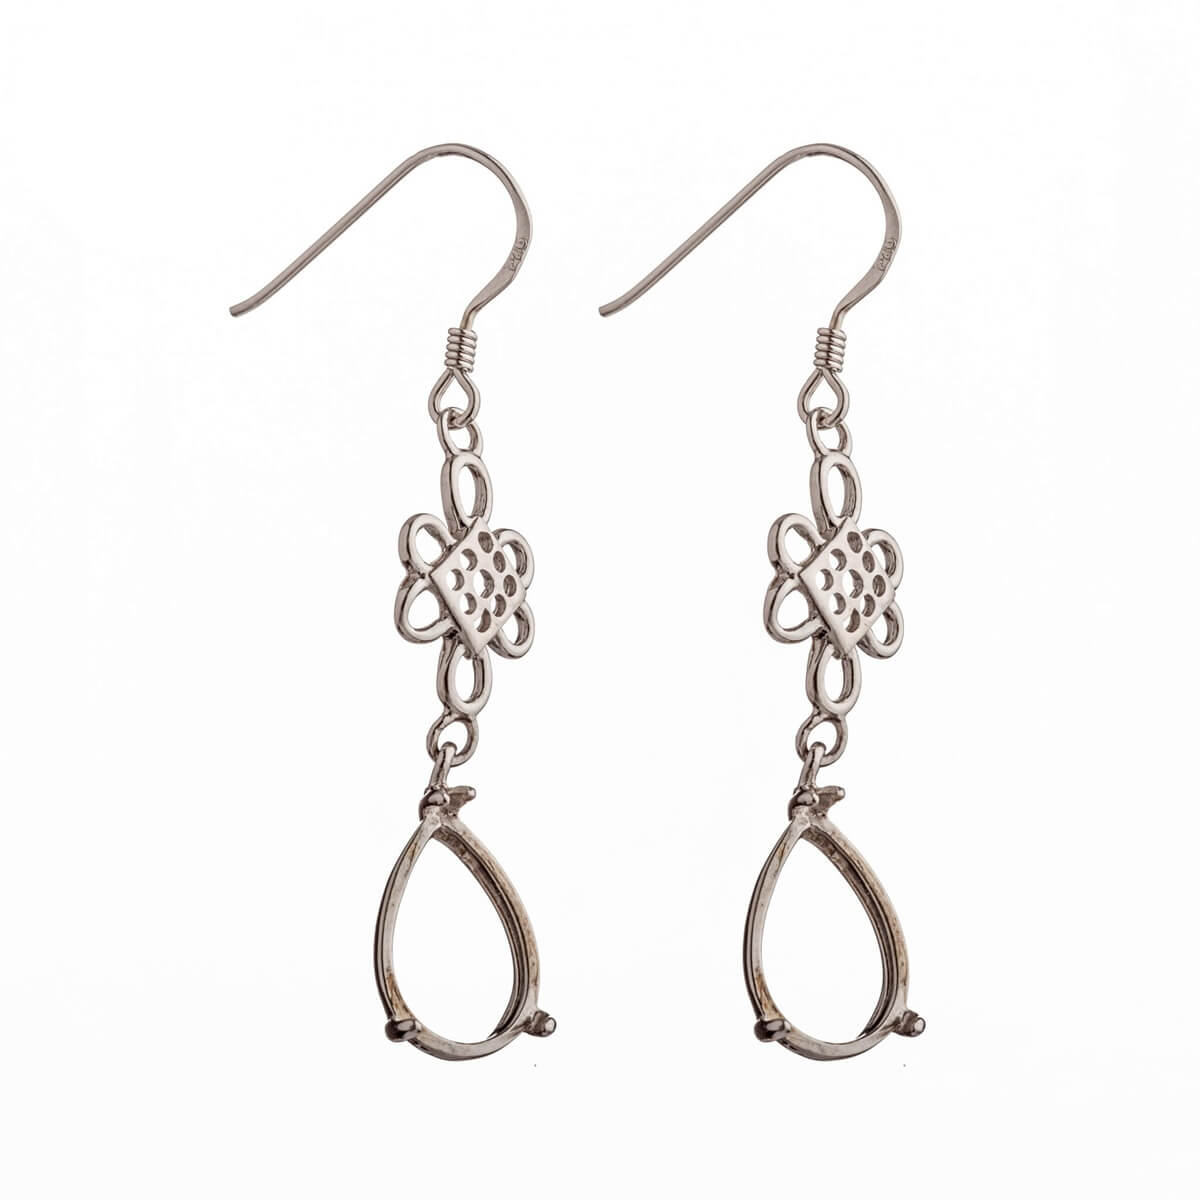 Ear Wires with Earring Components and Oval Mounting in Sterling Silver 7x11mm 